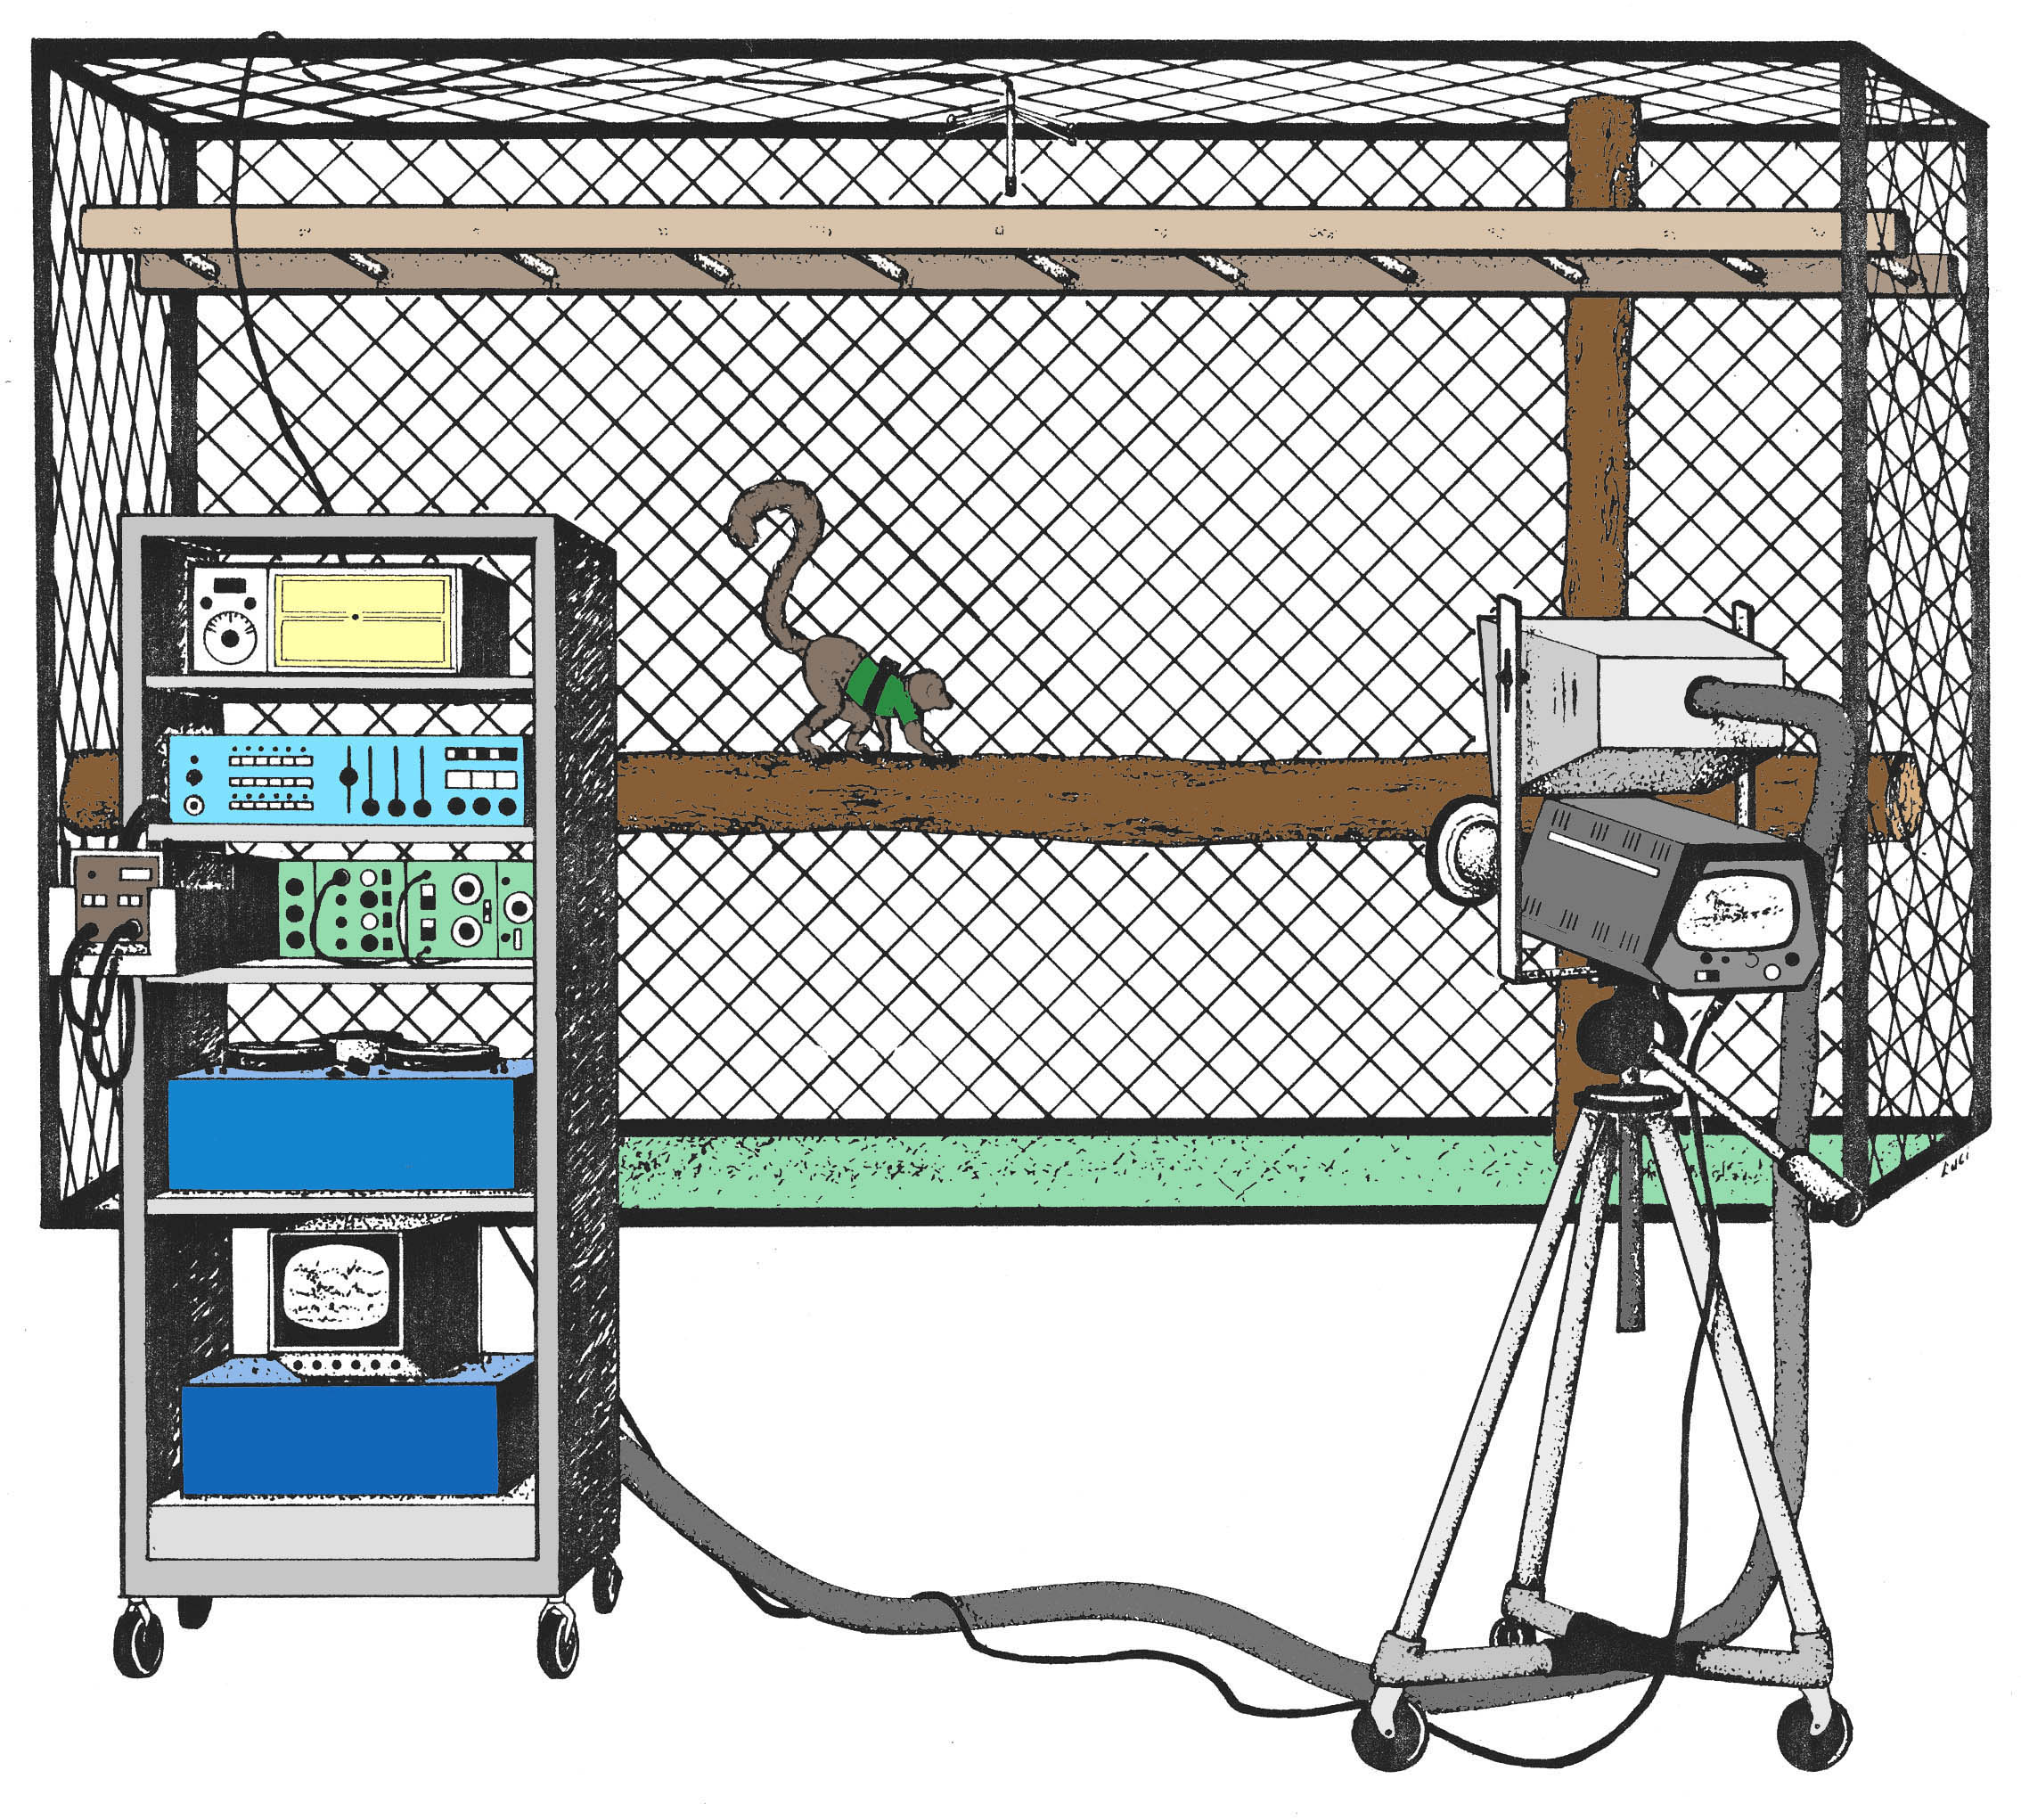 Schematic of Stony Brook Primate Locomotion Lab EMG recording set-up. Illustration by Luci Betti-Nash, nd